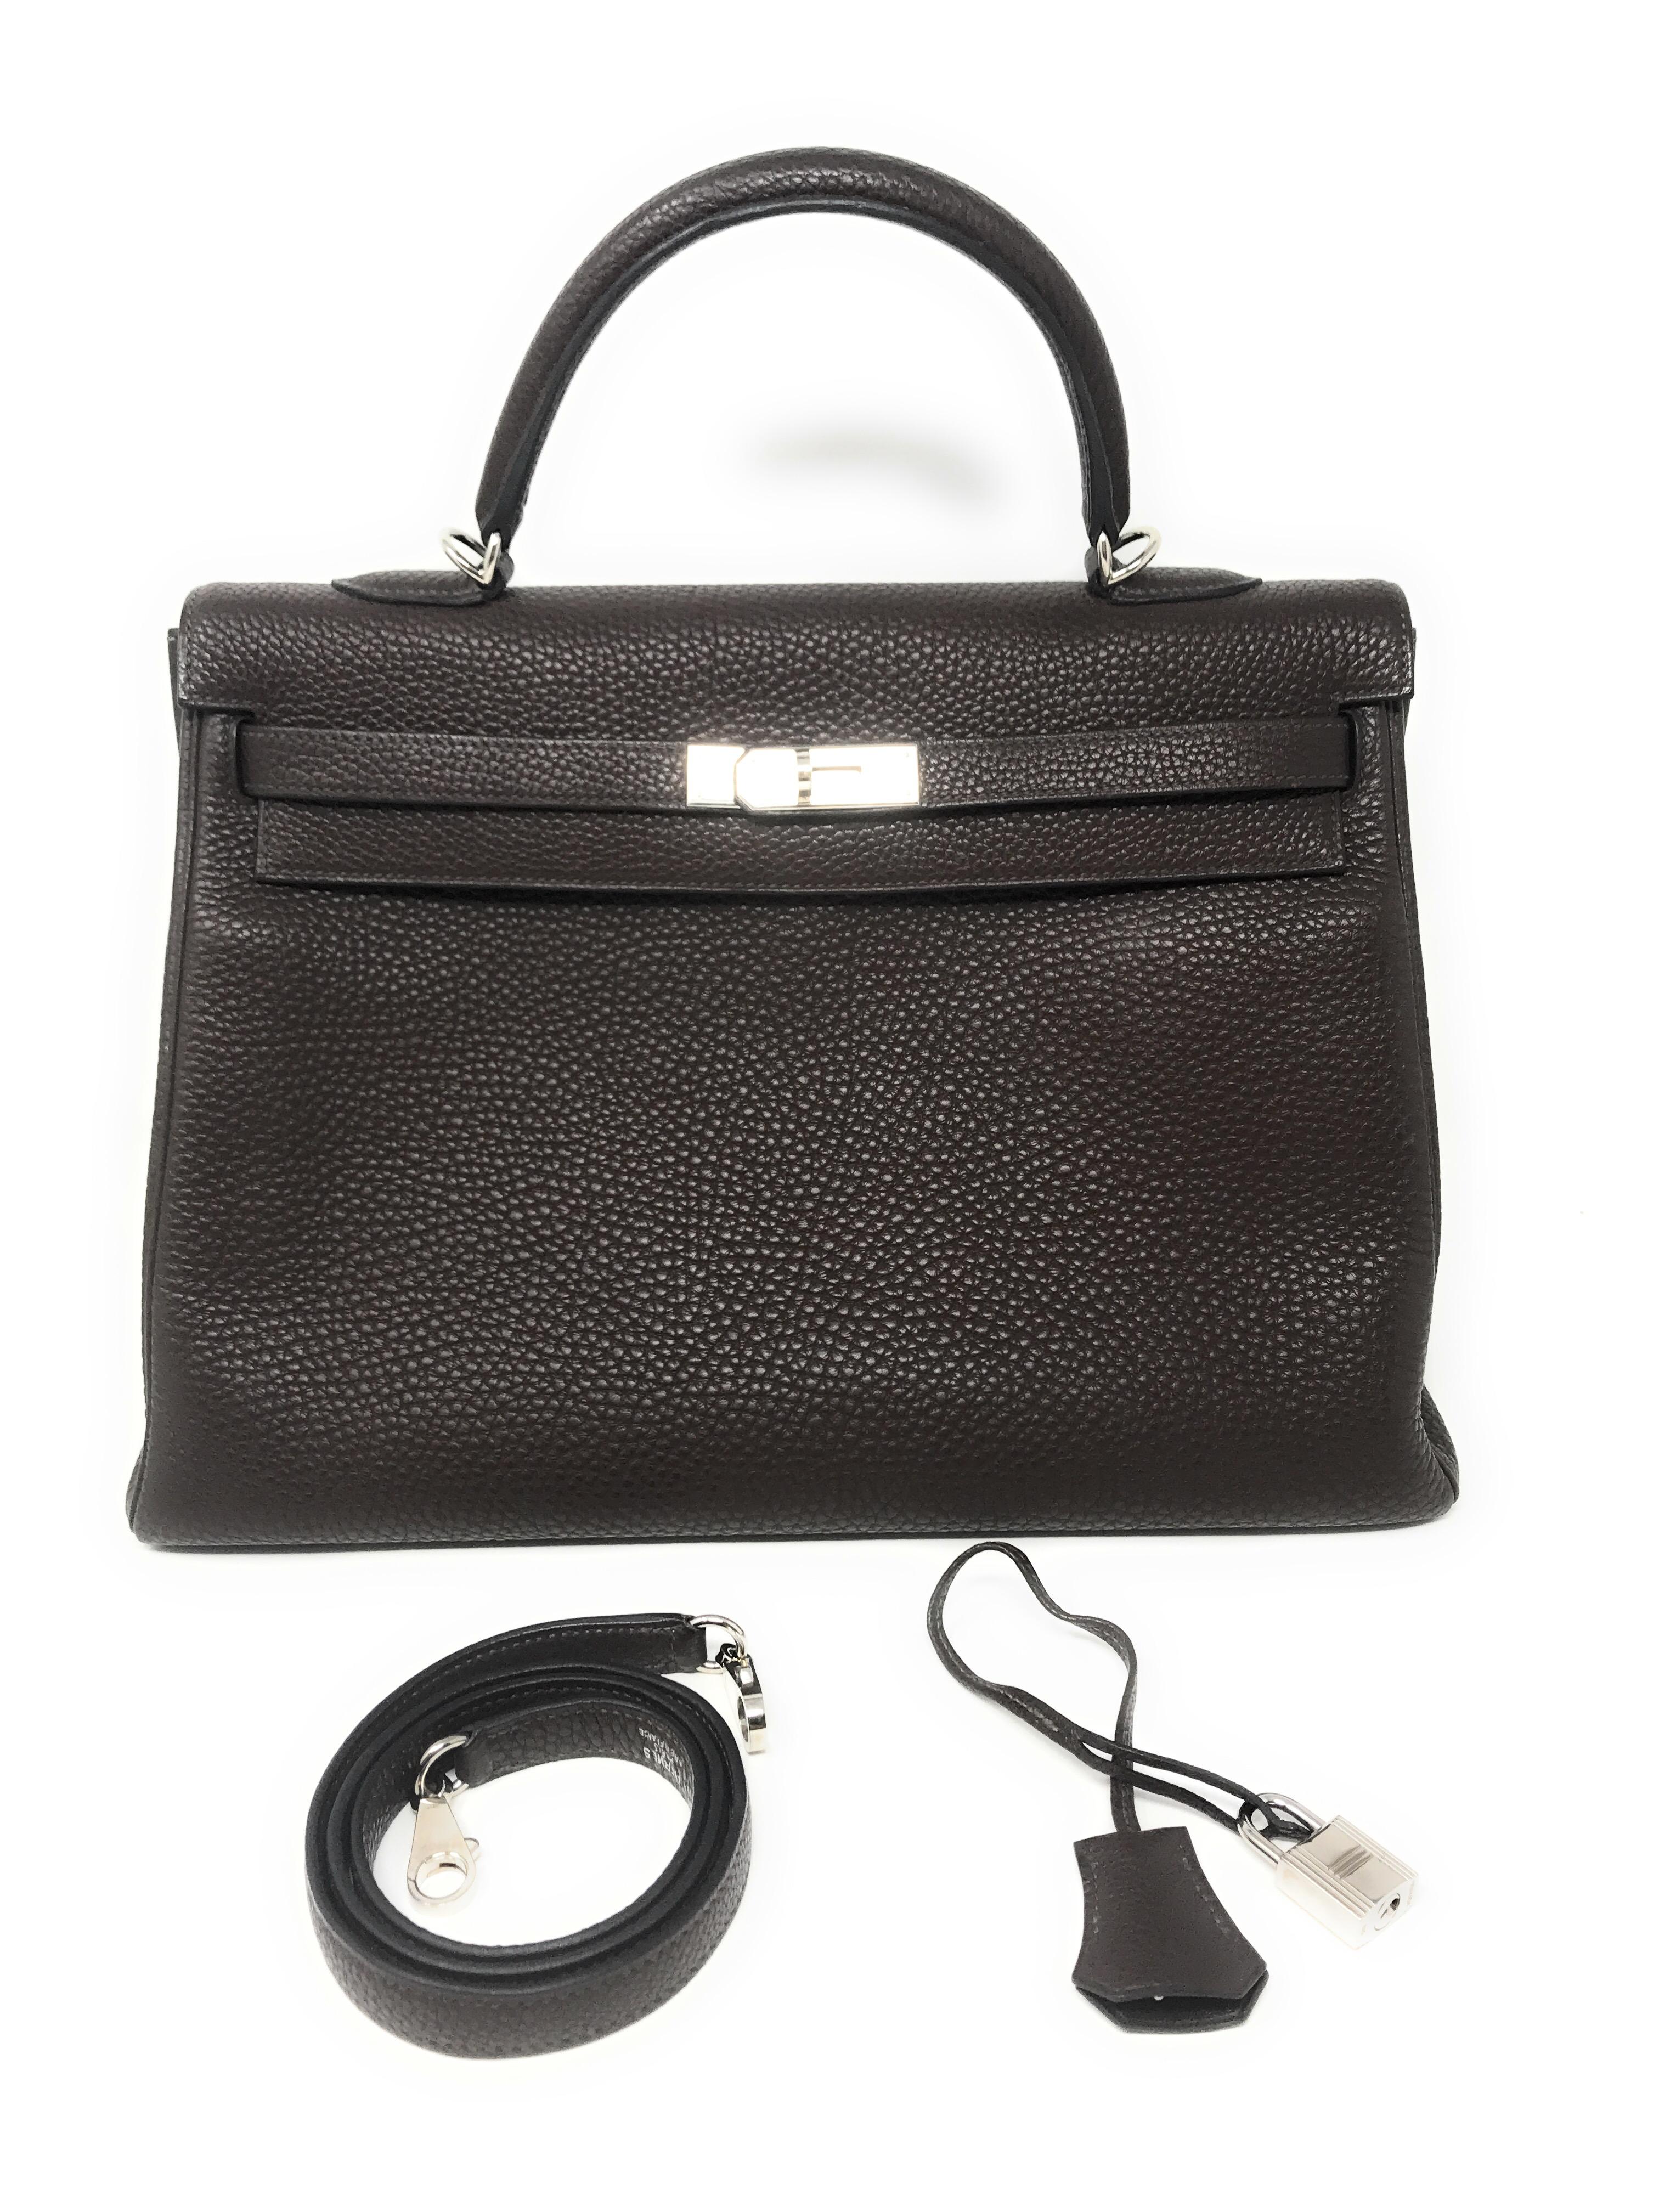 Hermes Kelly 35cm Chocolate Brown For Sale 6